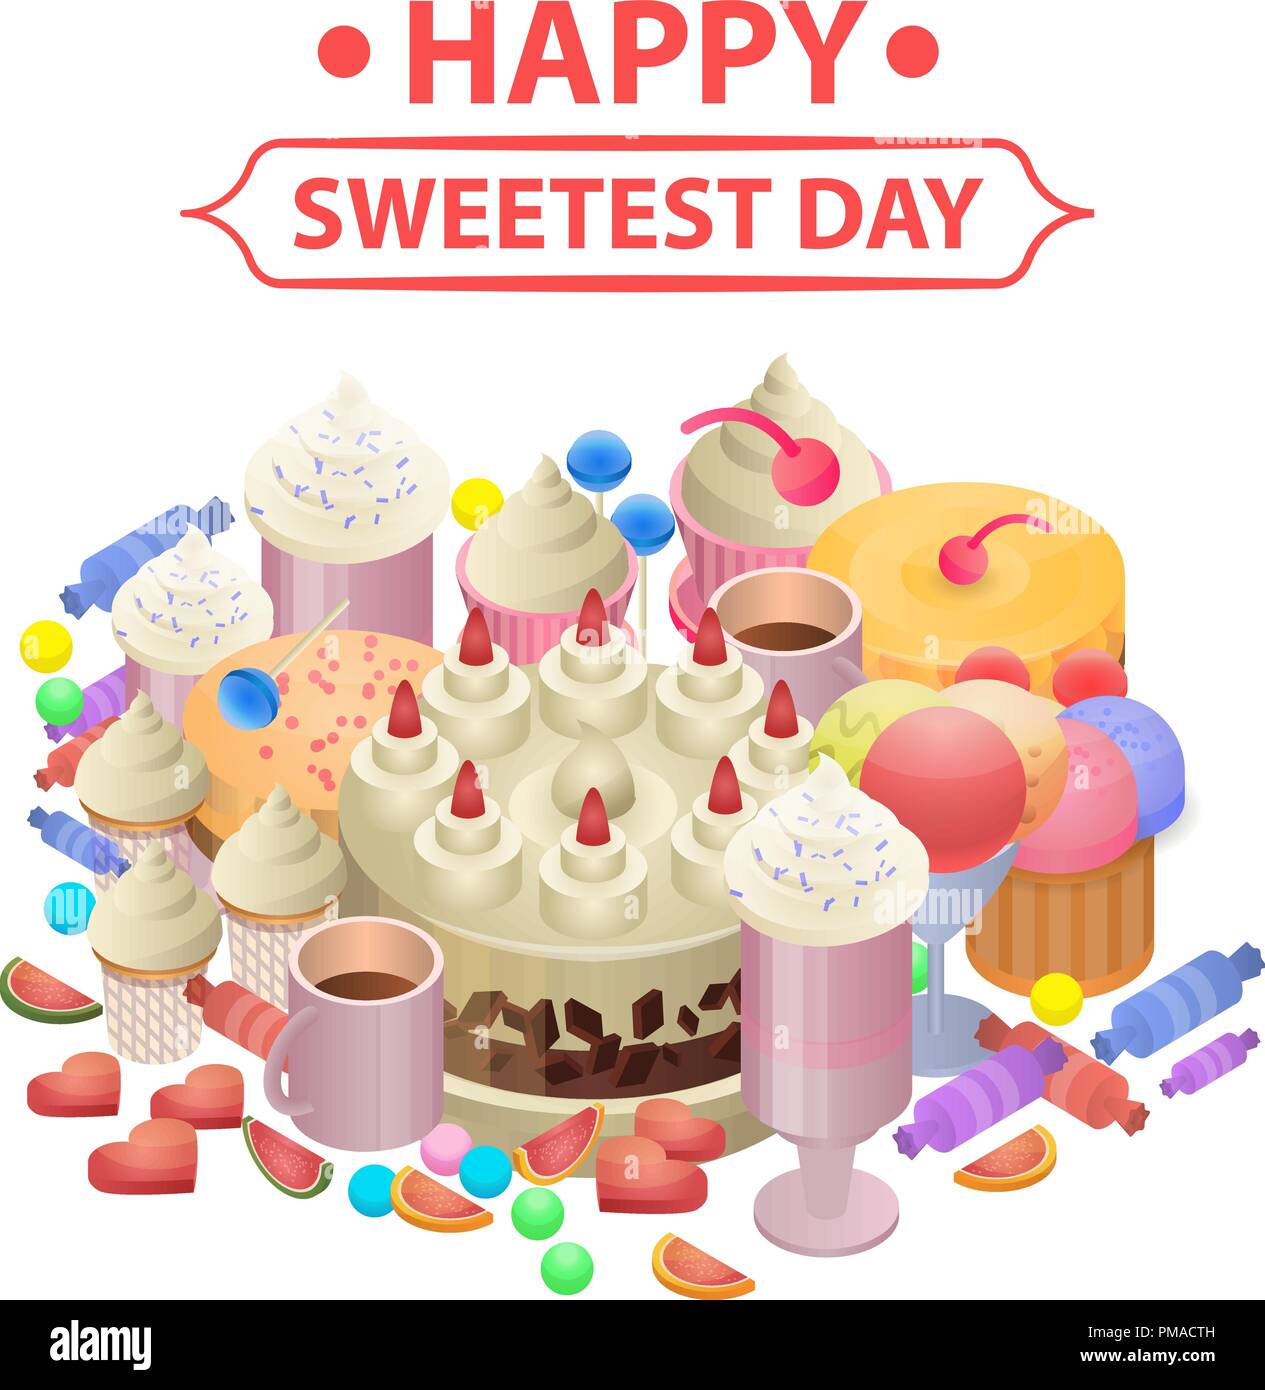 Happy sweetest day concept background, isometric style Stock Vector